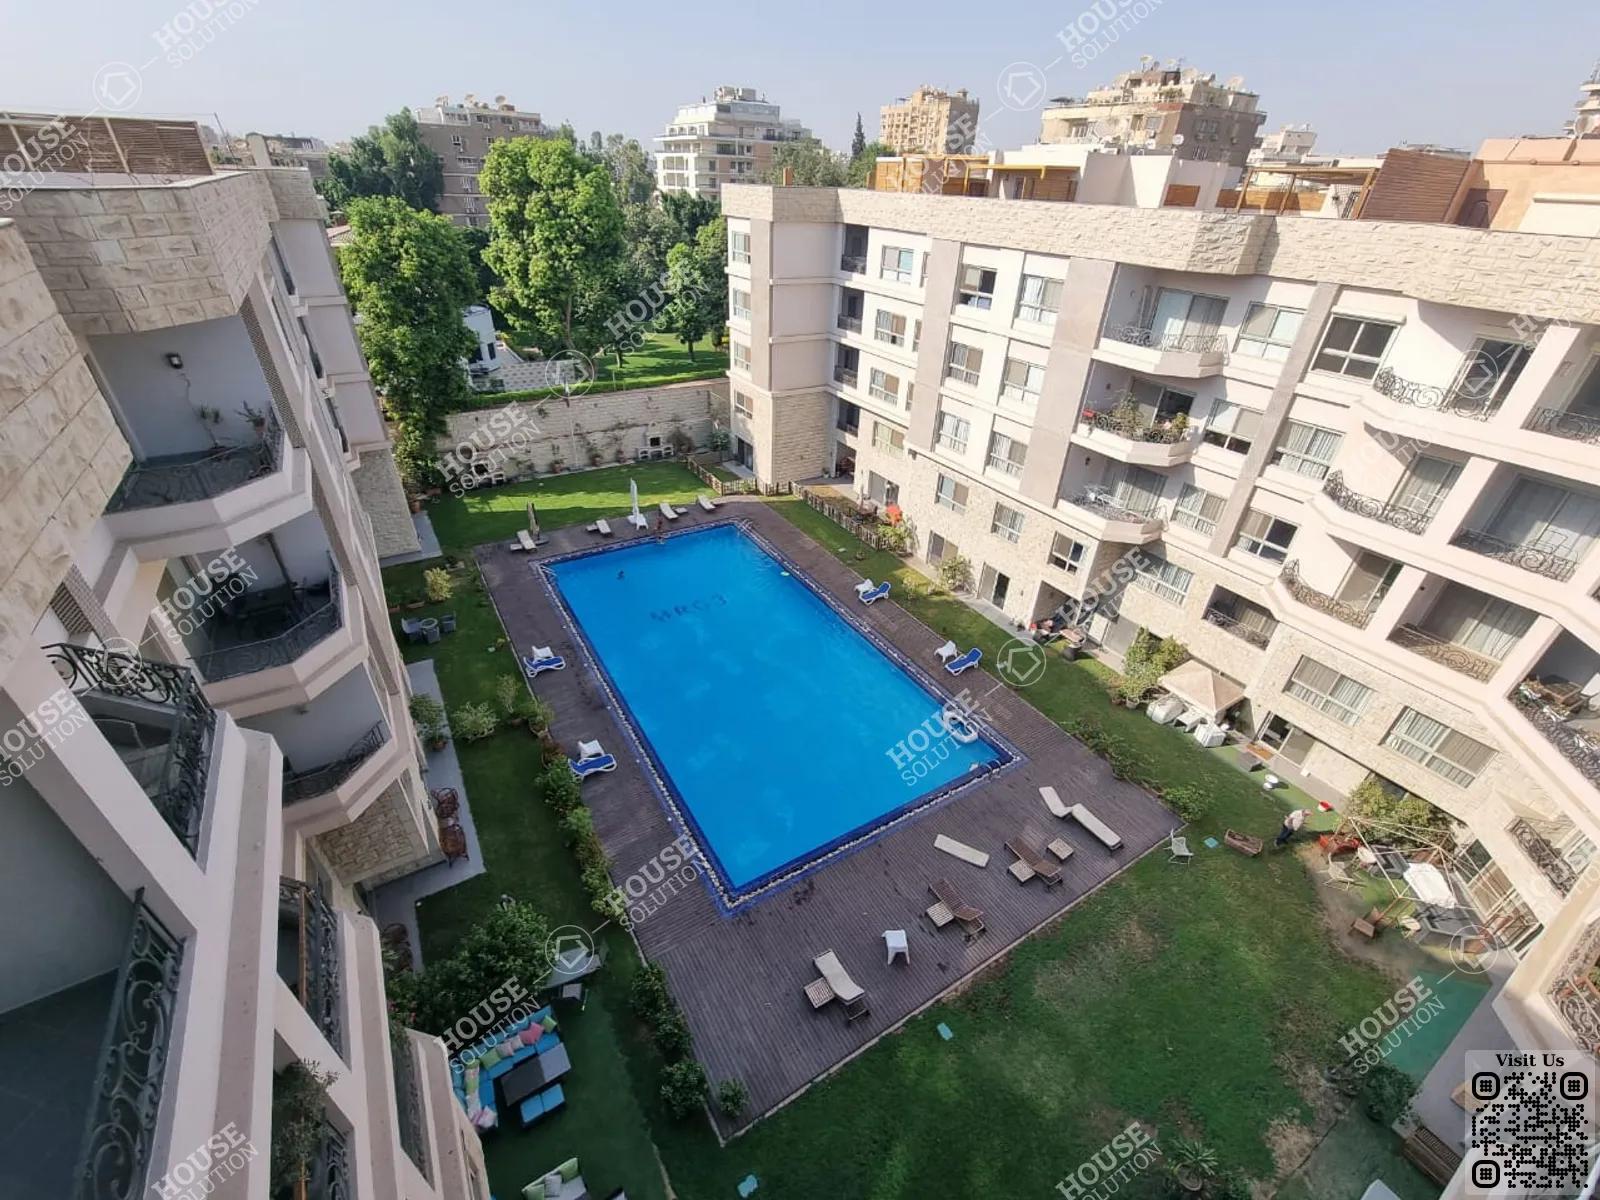 SHARED SWIMMING POOL  @ Penthouses For Rent In Maadi Maadi Sarayat Area: 450 m² consists of 5 Bedrooms 7 Bathrooms Semi furnished 5 stars #5129-2